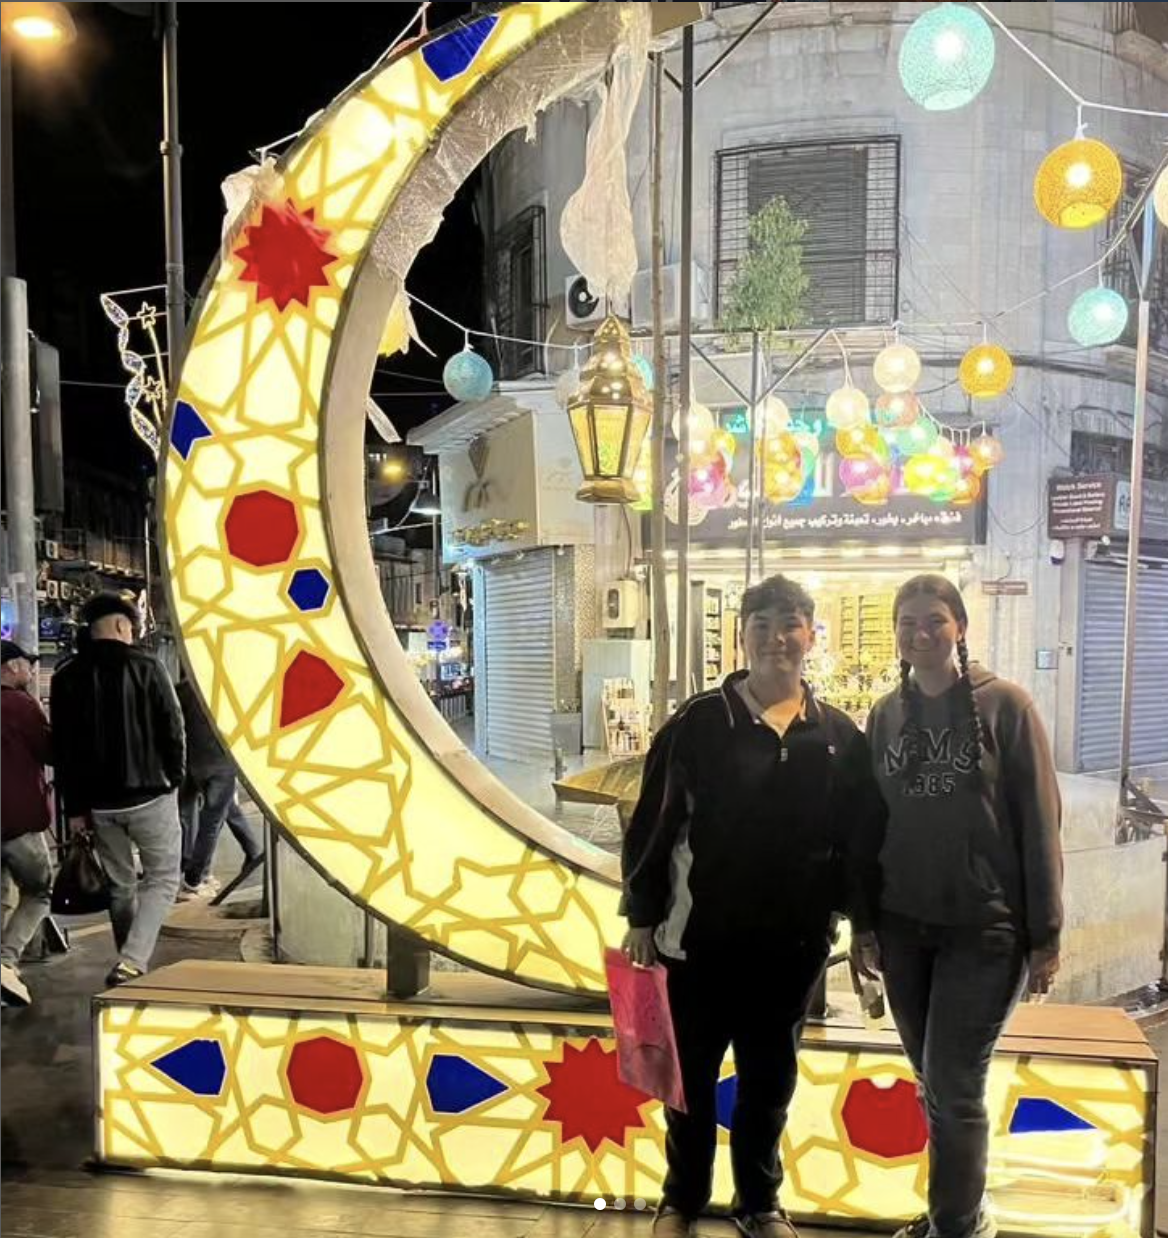 Two people smiling in front of a crescent moon lantern